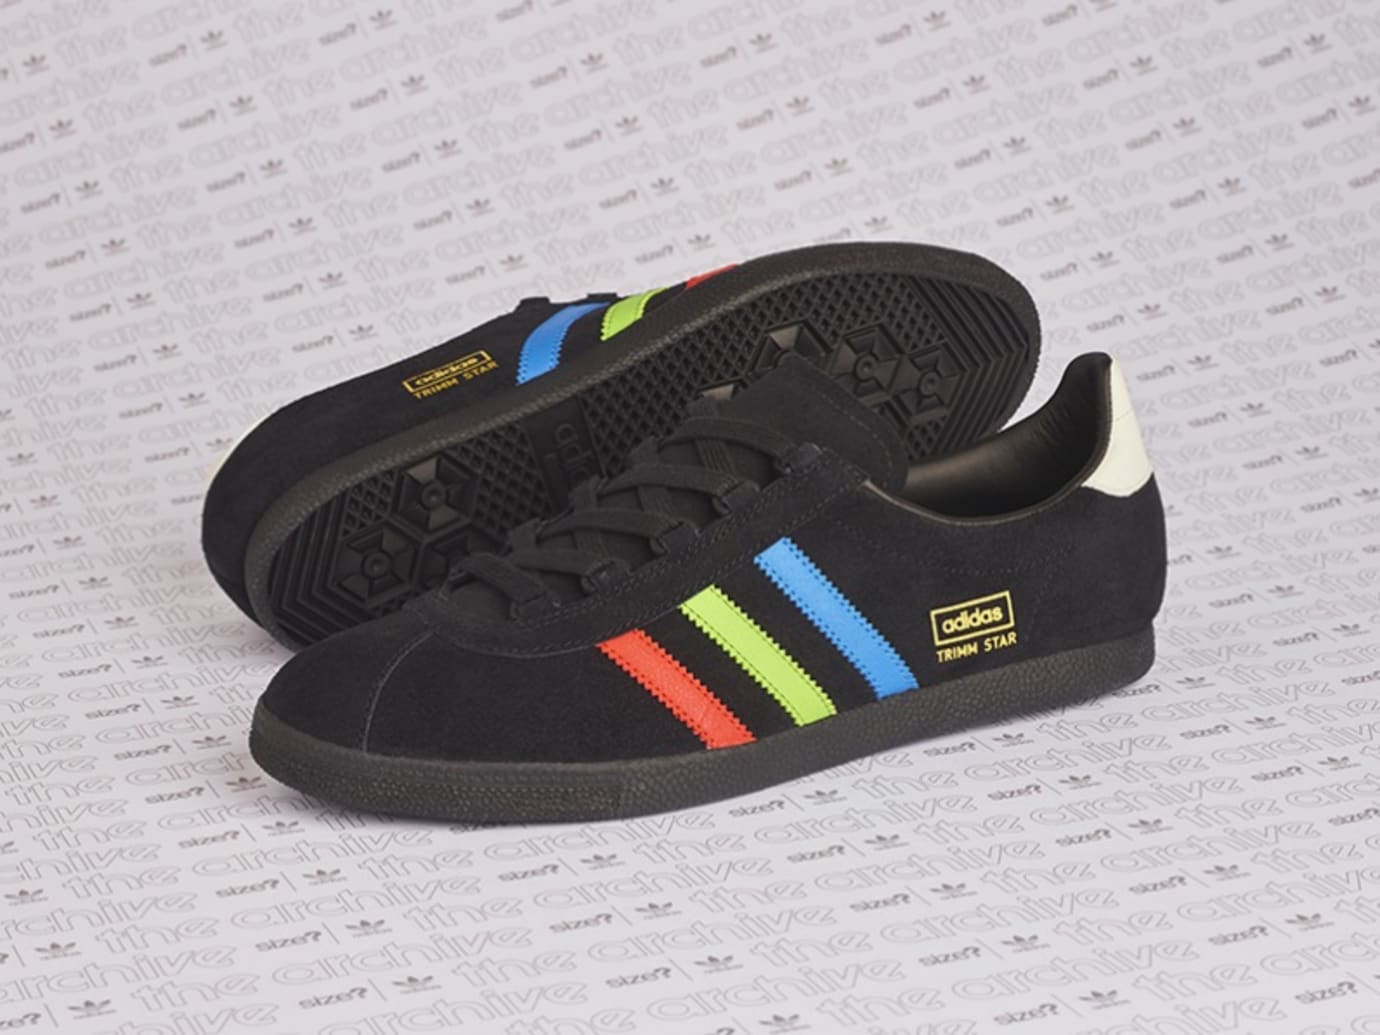 adidas trimm star new release 2018